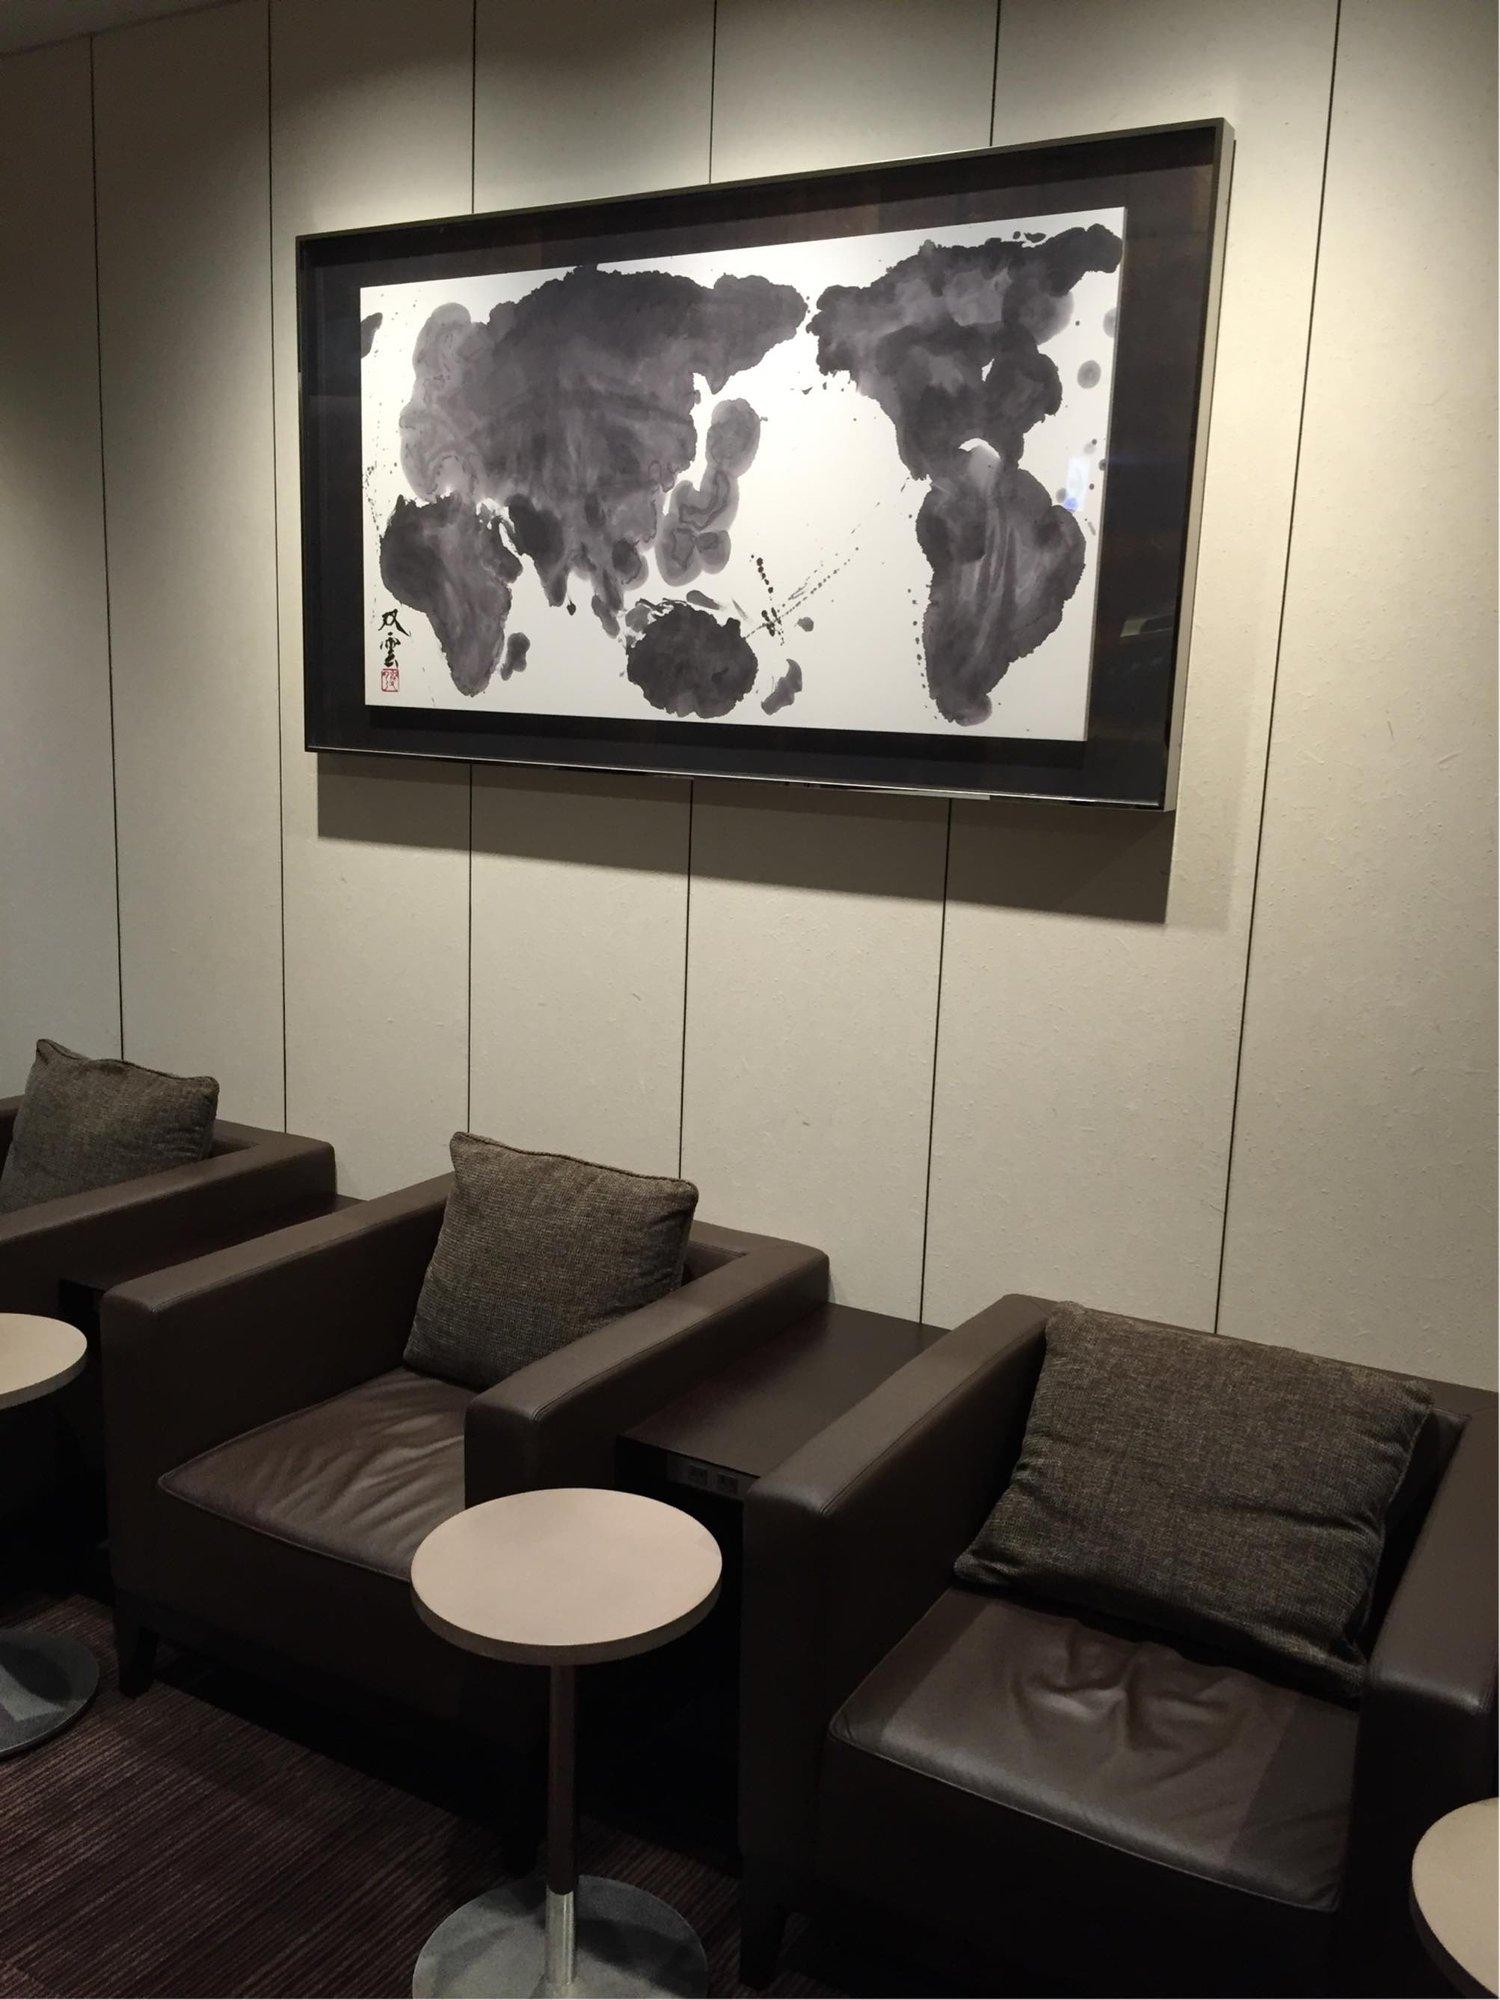 Japan Airlines JAL First Class Lounge image 27 of 43